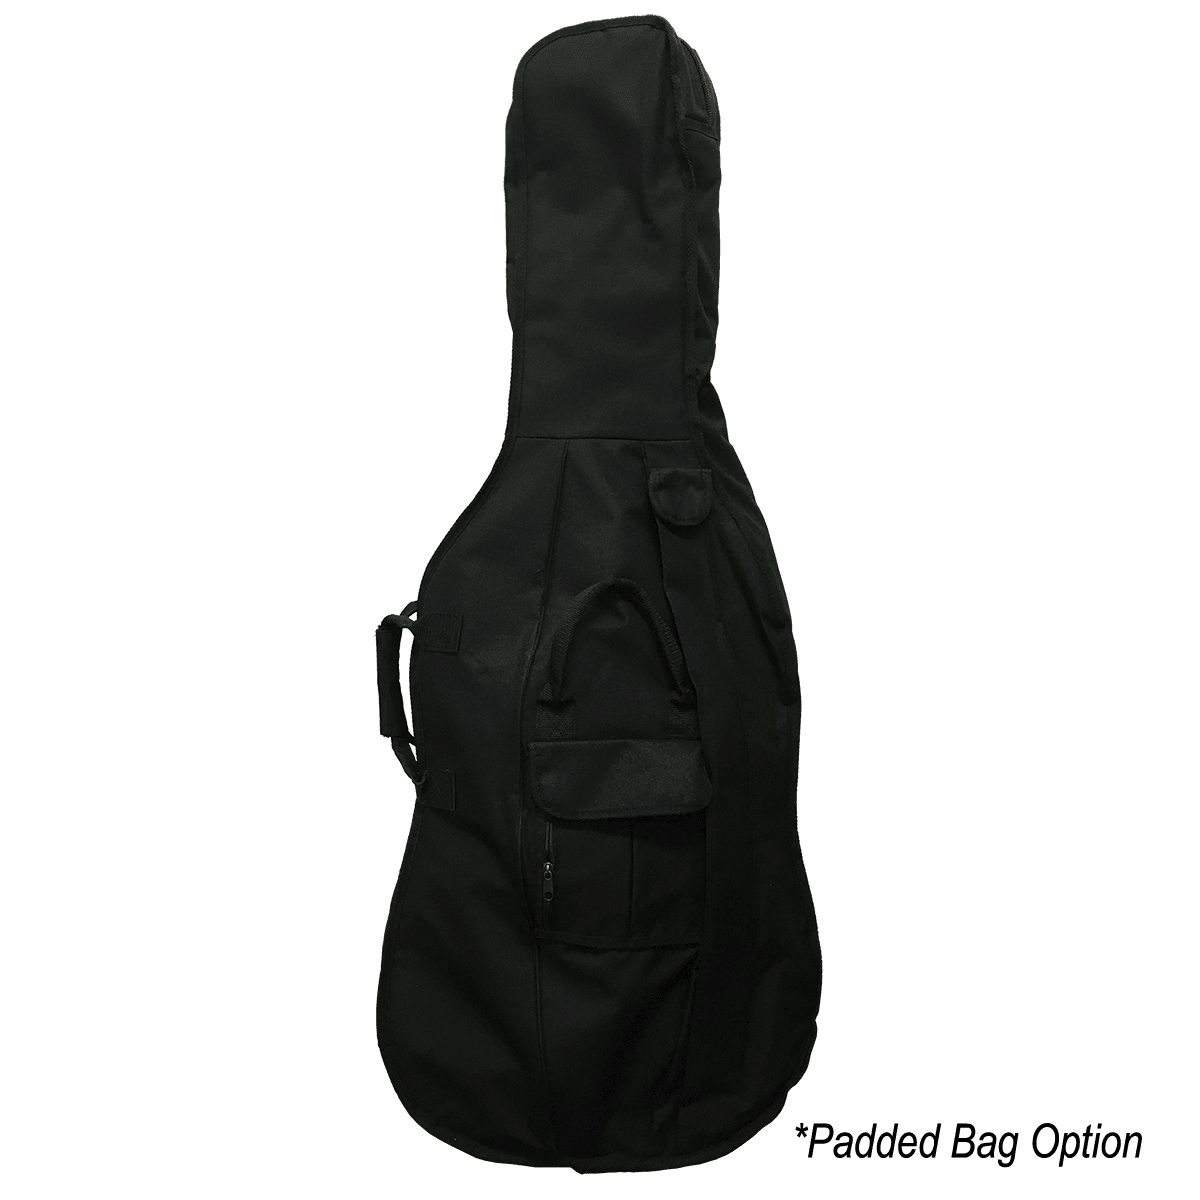 Vivo Student 3/4 Cello Outfit with Bag